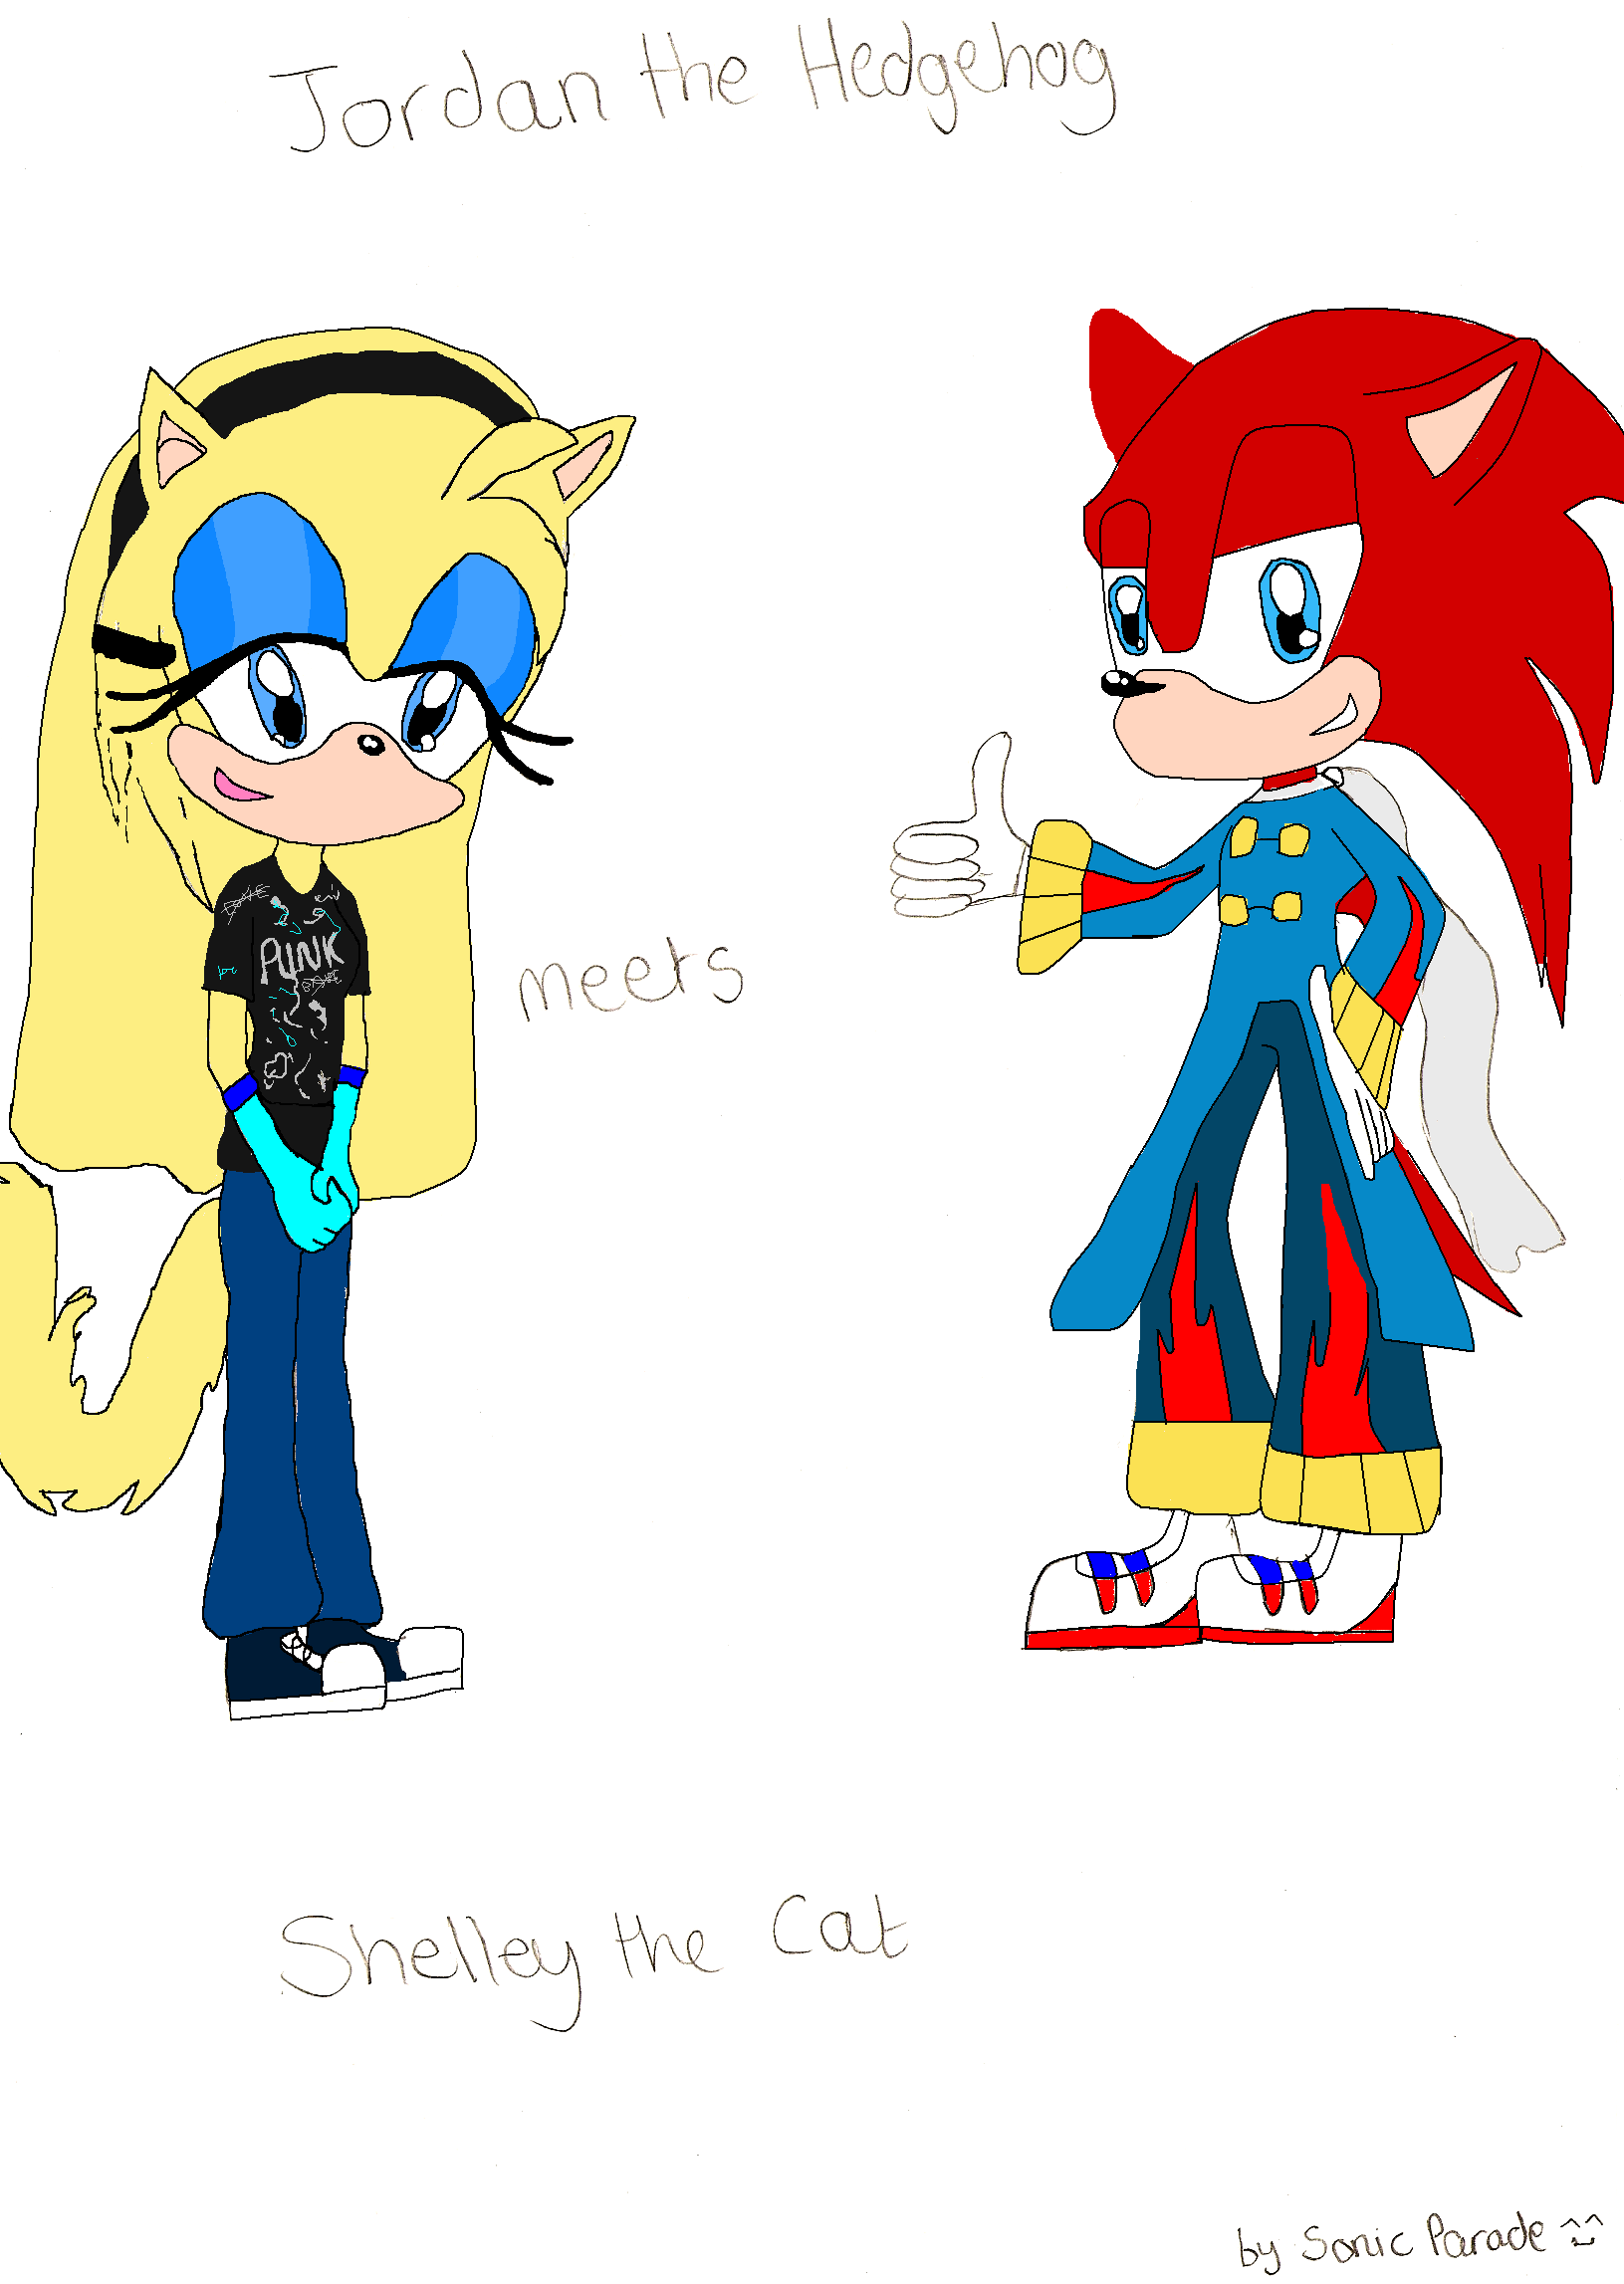 Shelley The Cat Meets Jordan The Hedgehog(coloured) by sonicparade